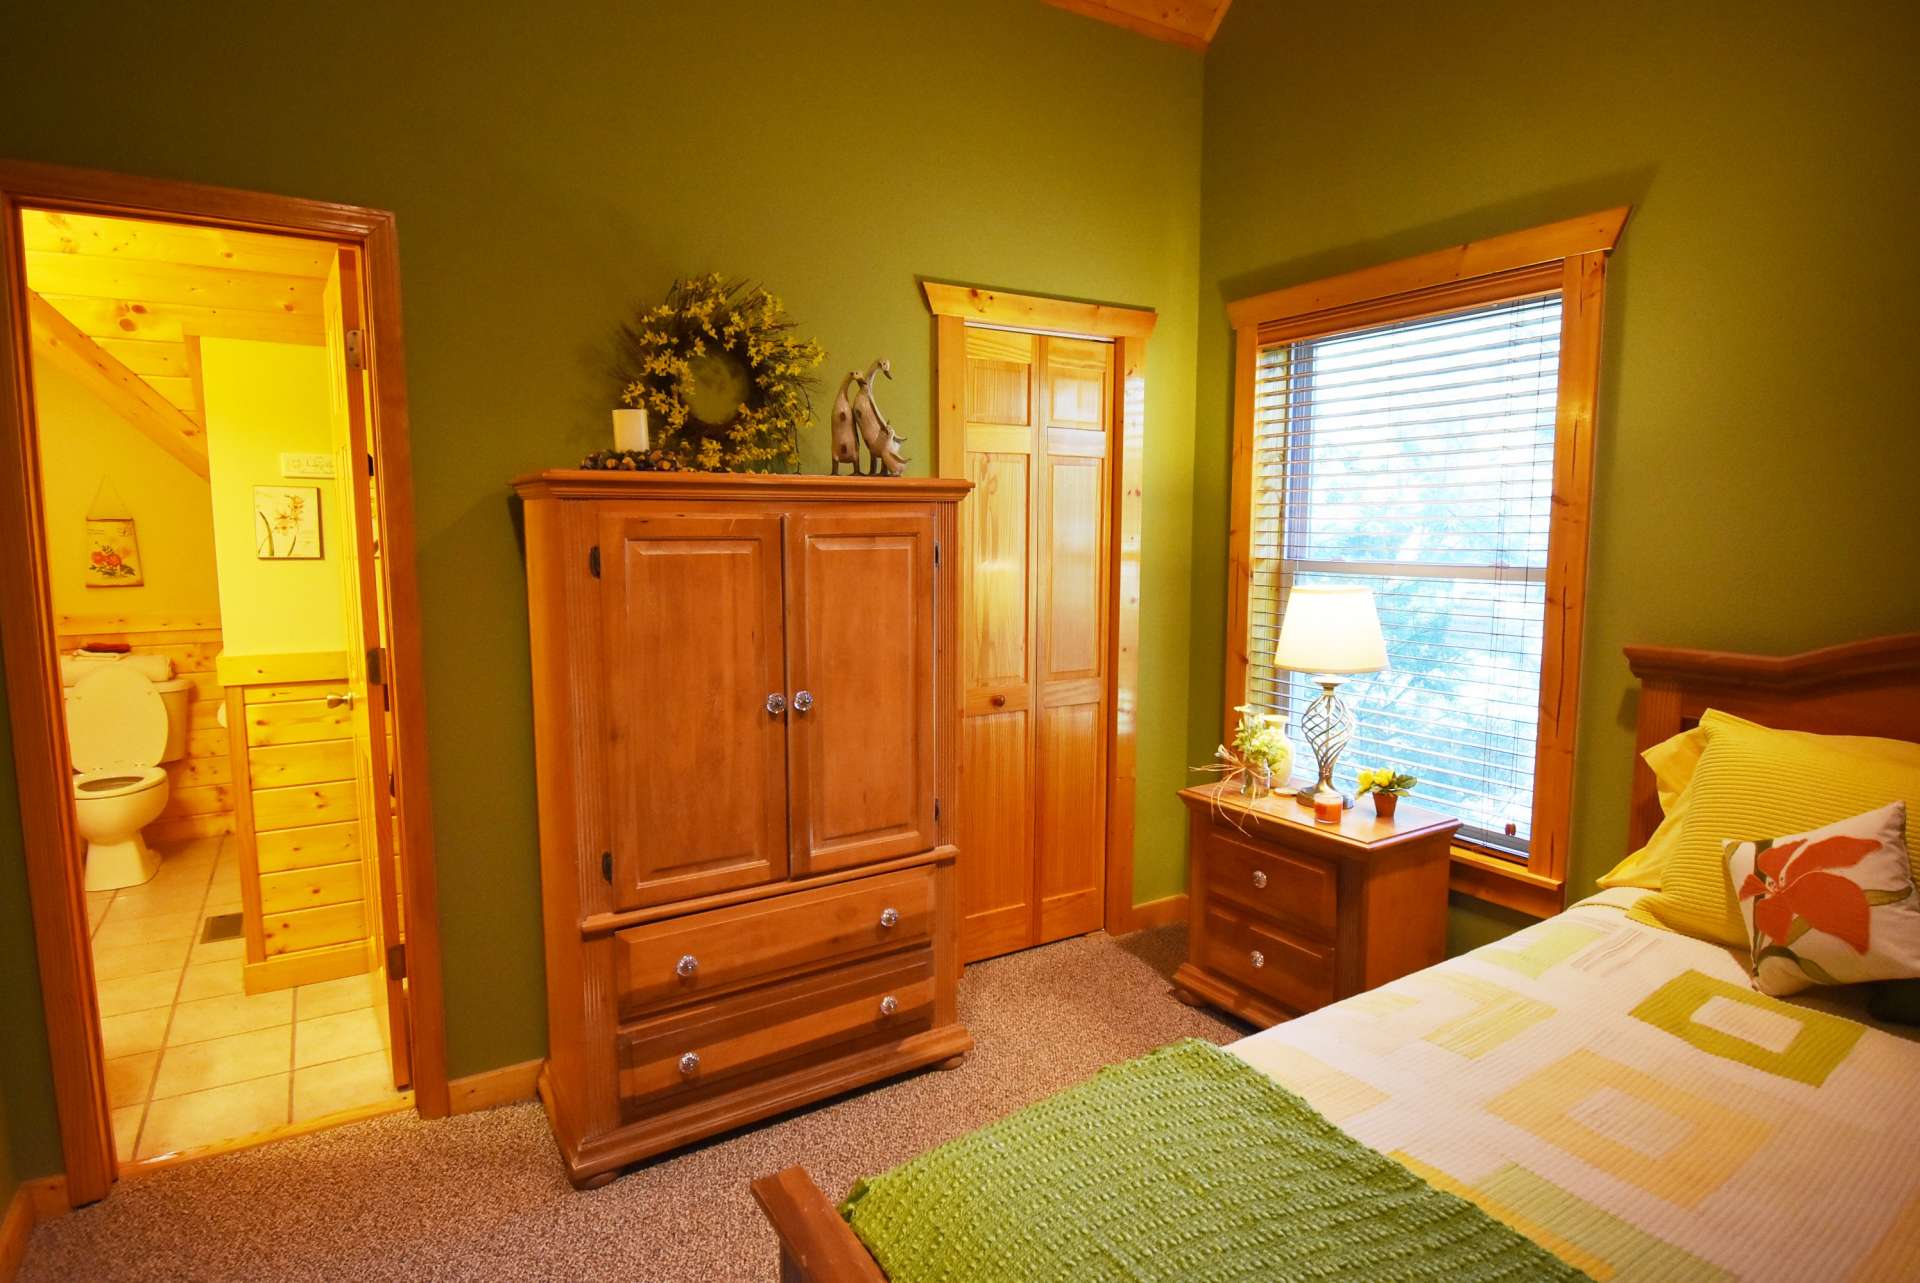 The second bedroom is located on the upper level and features an en-suite full bath.